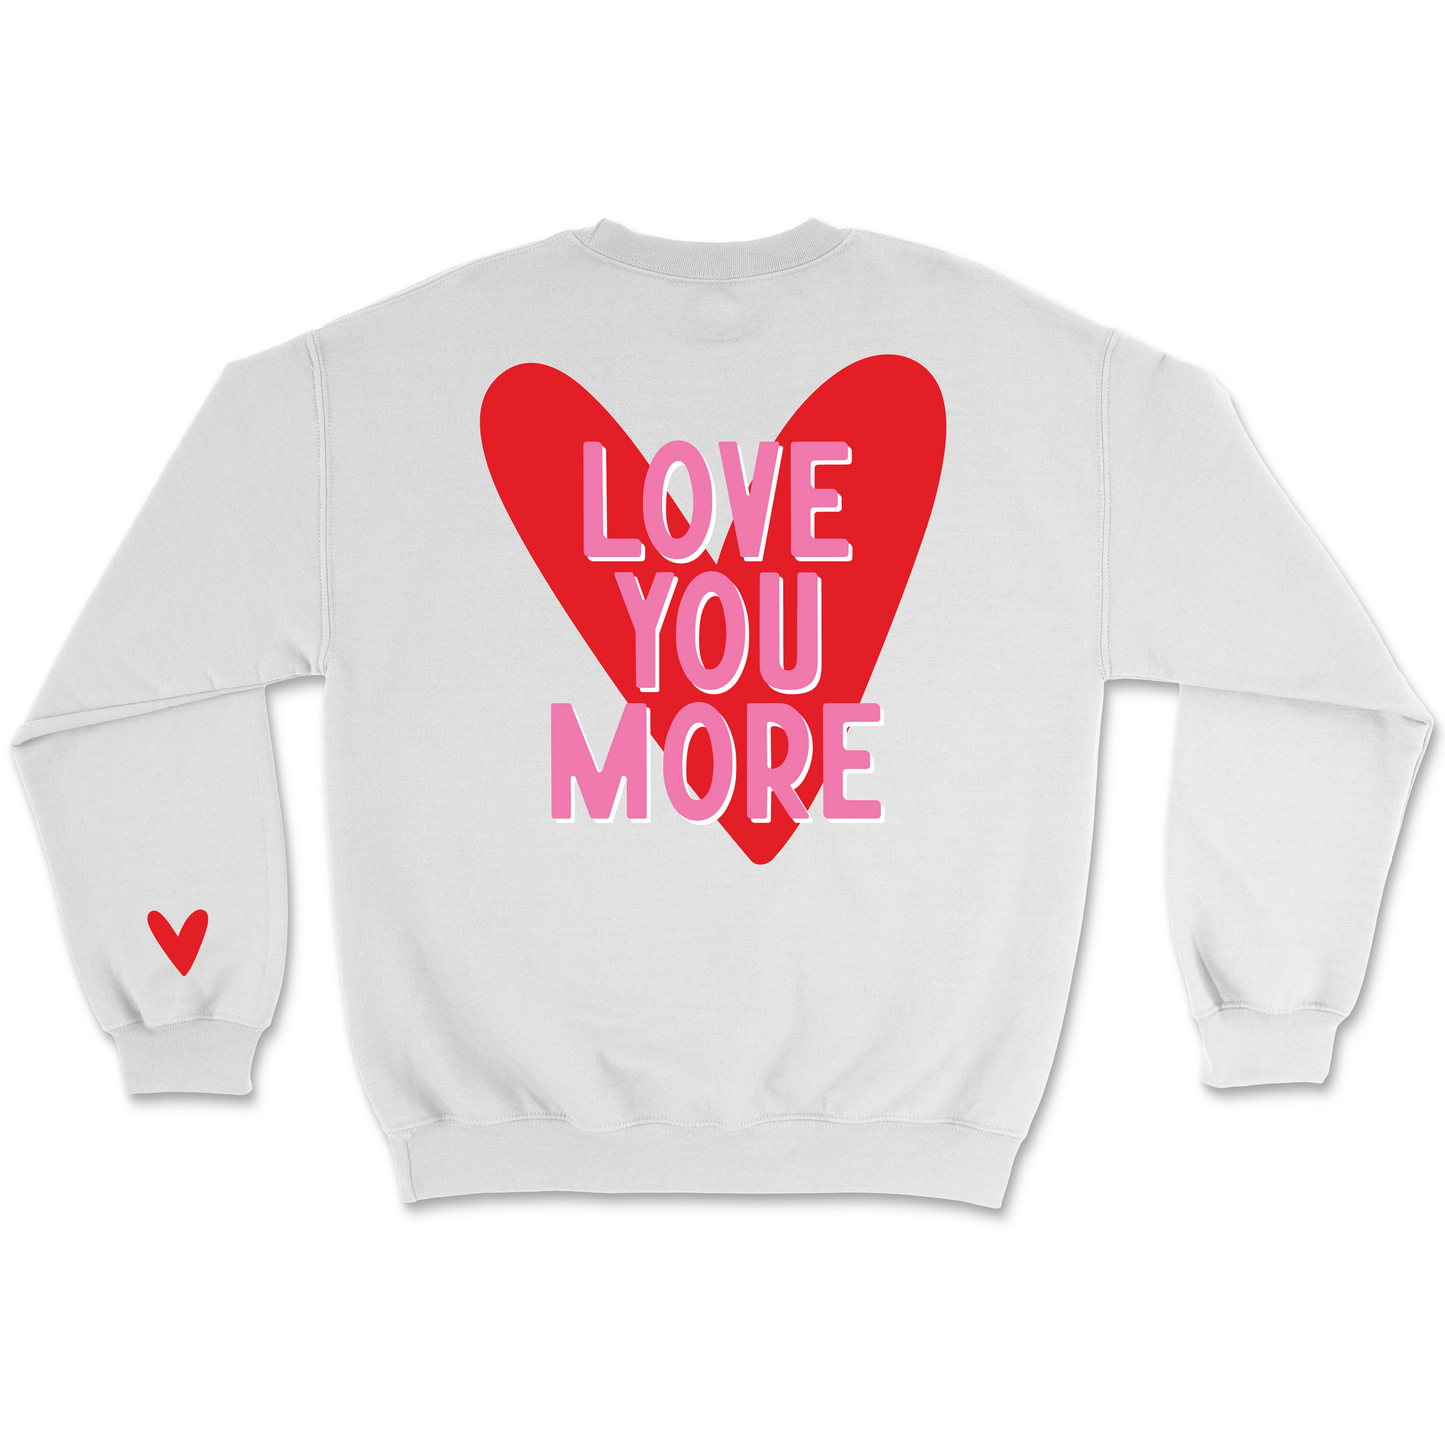 LOVE YOU MORE SWEATER YOUTH AND ADULT